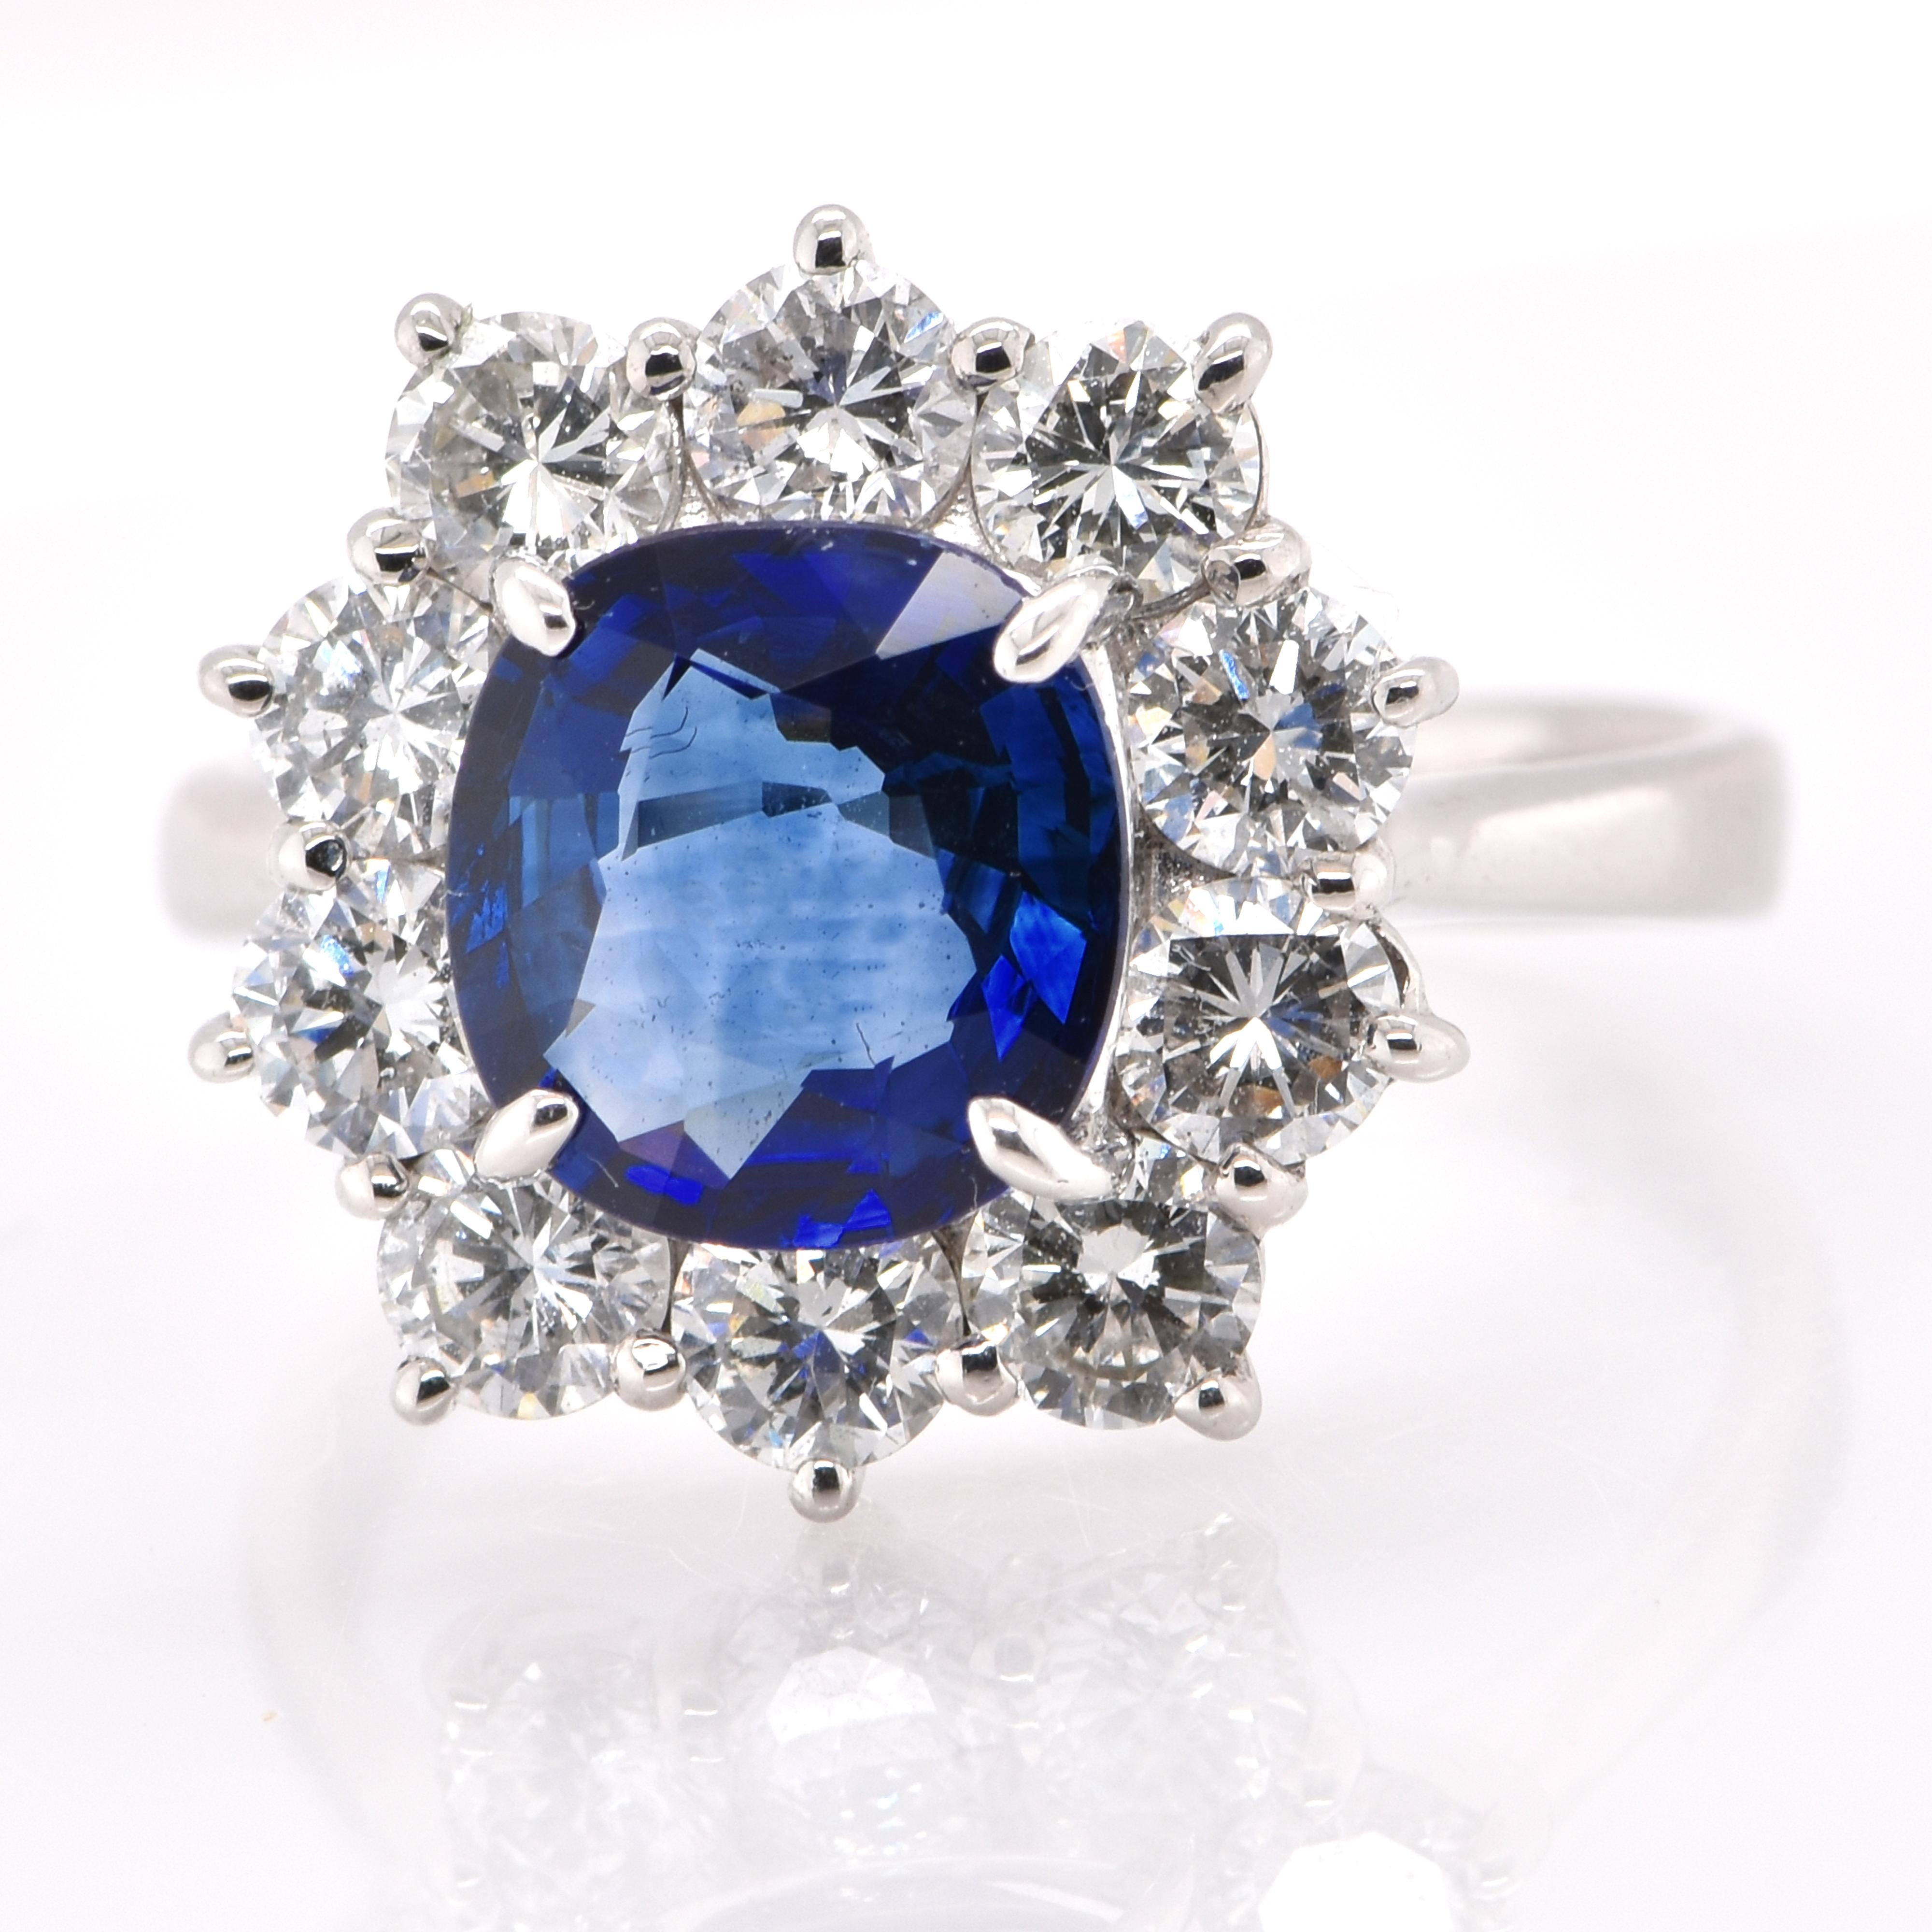 Oval Cut 2.33 Carat Natural Sapphire and Diamond Halo Ring Set in Platinum